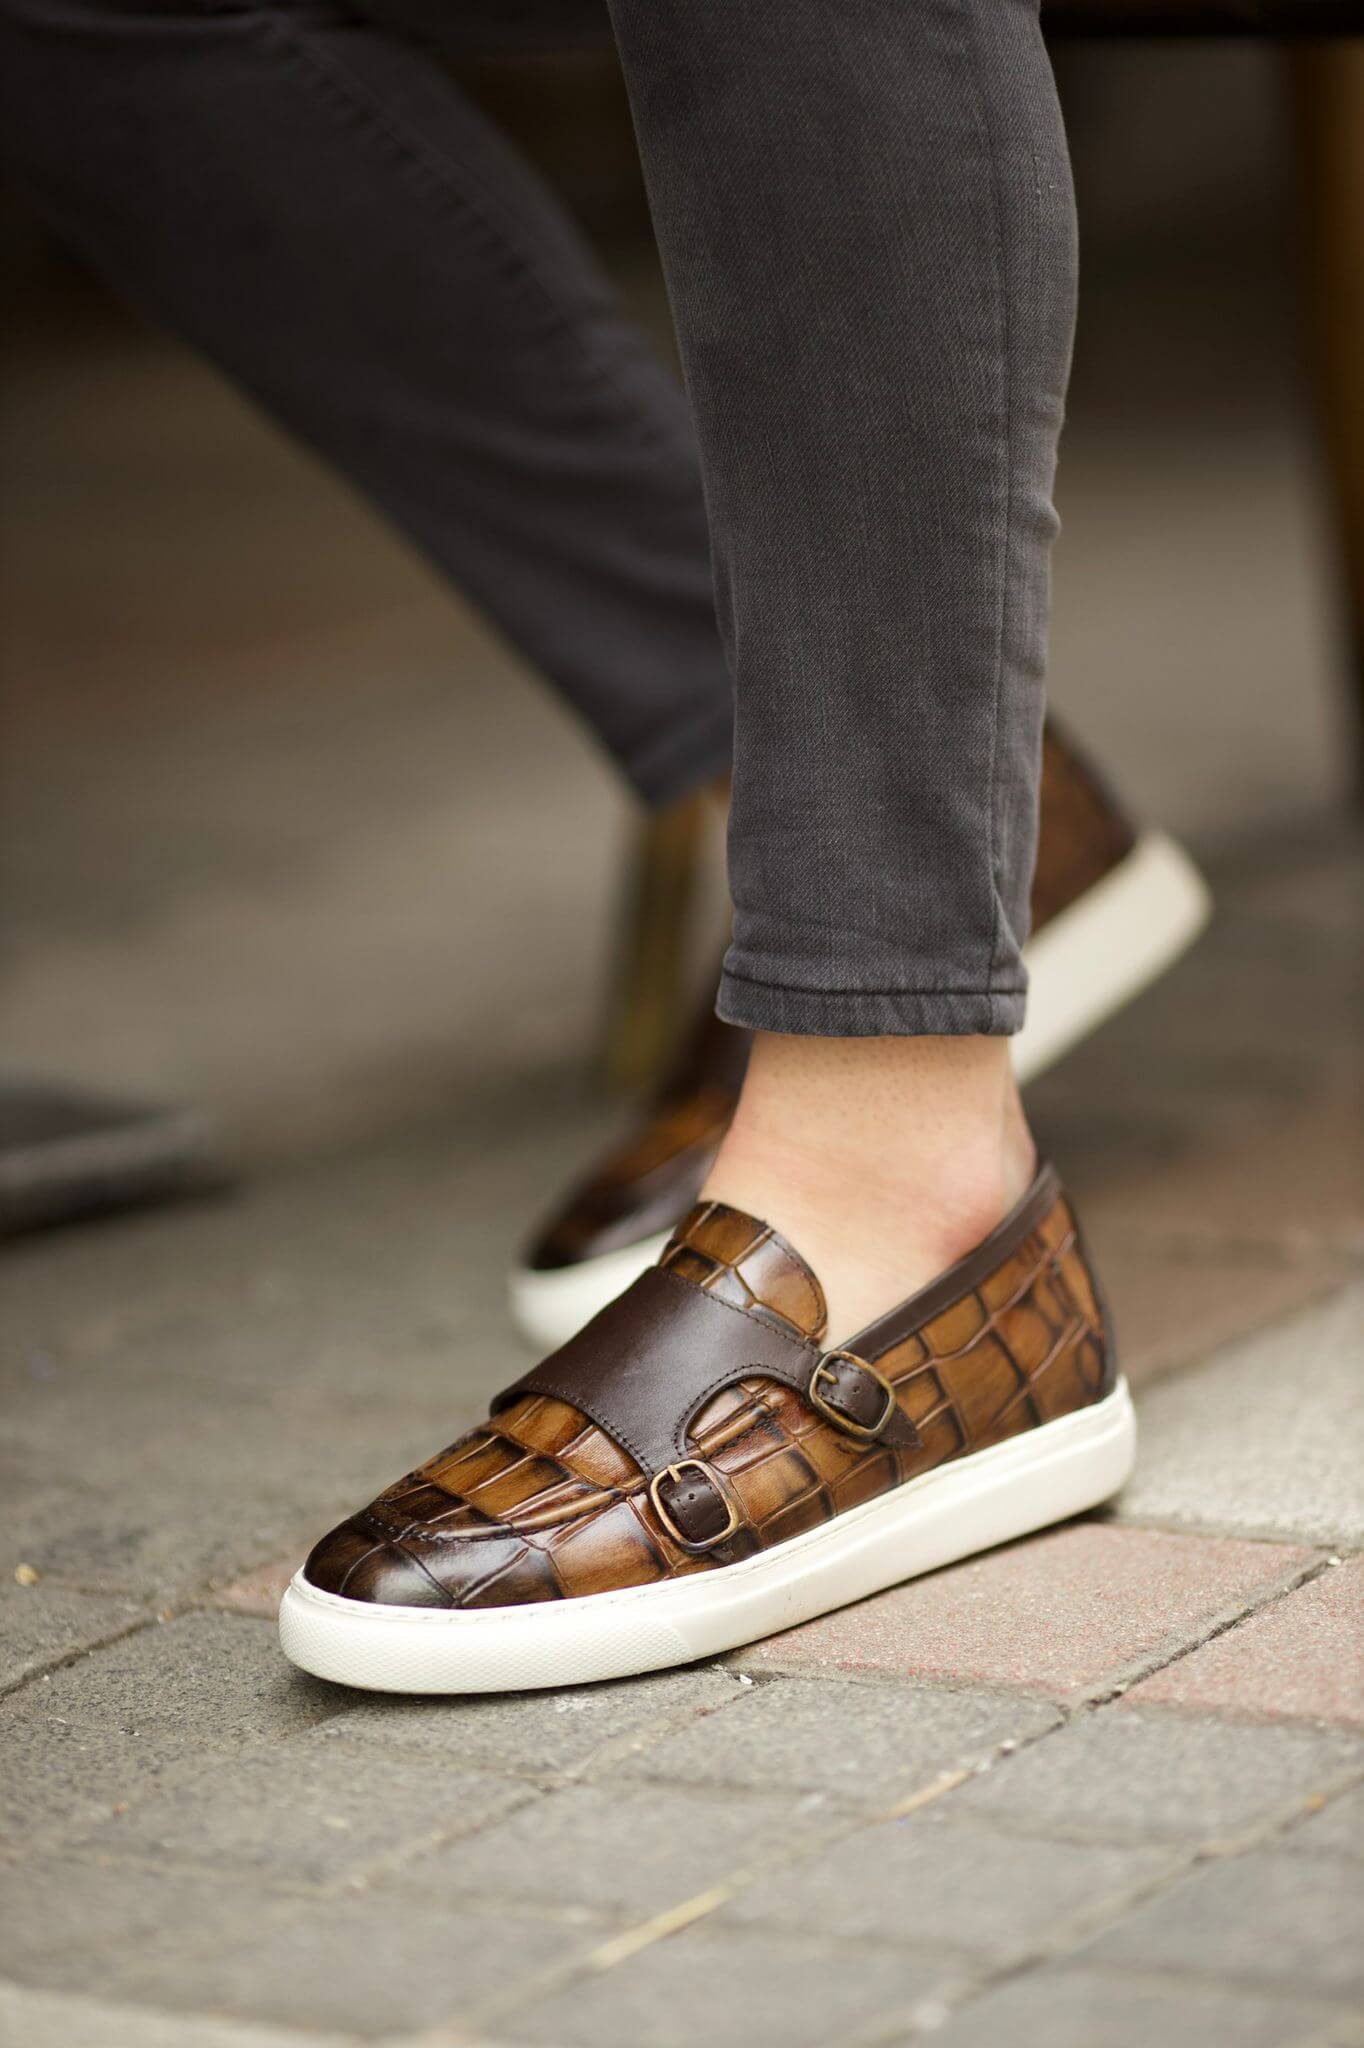 A Brown Buckled Detailed Loafer on display.